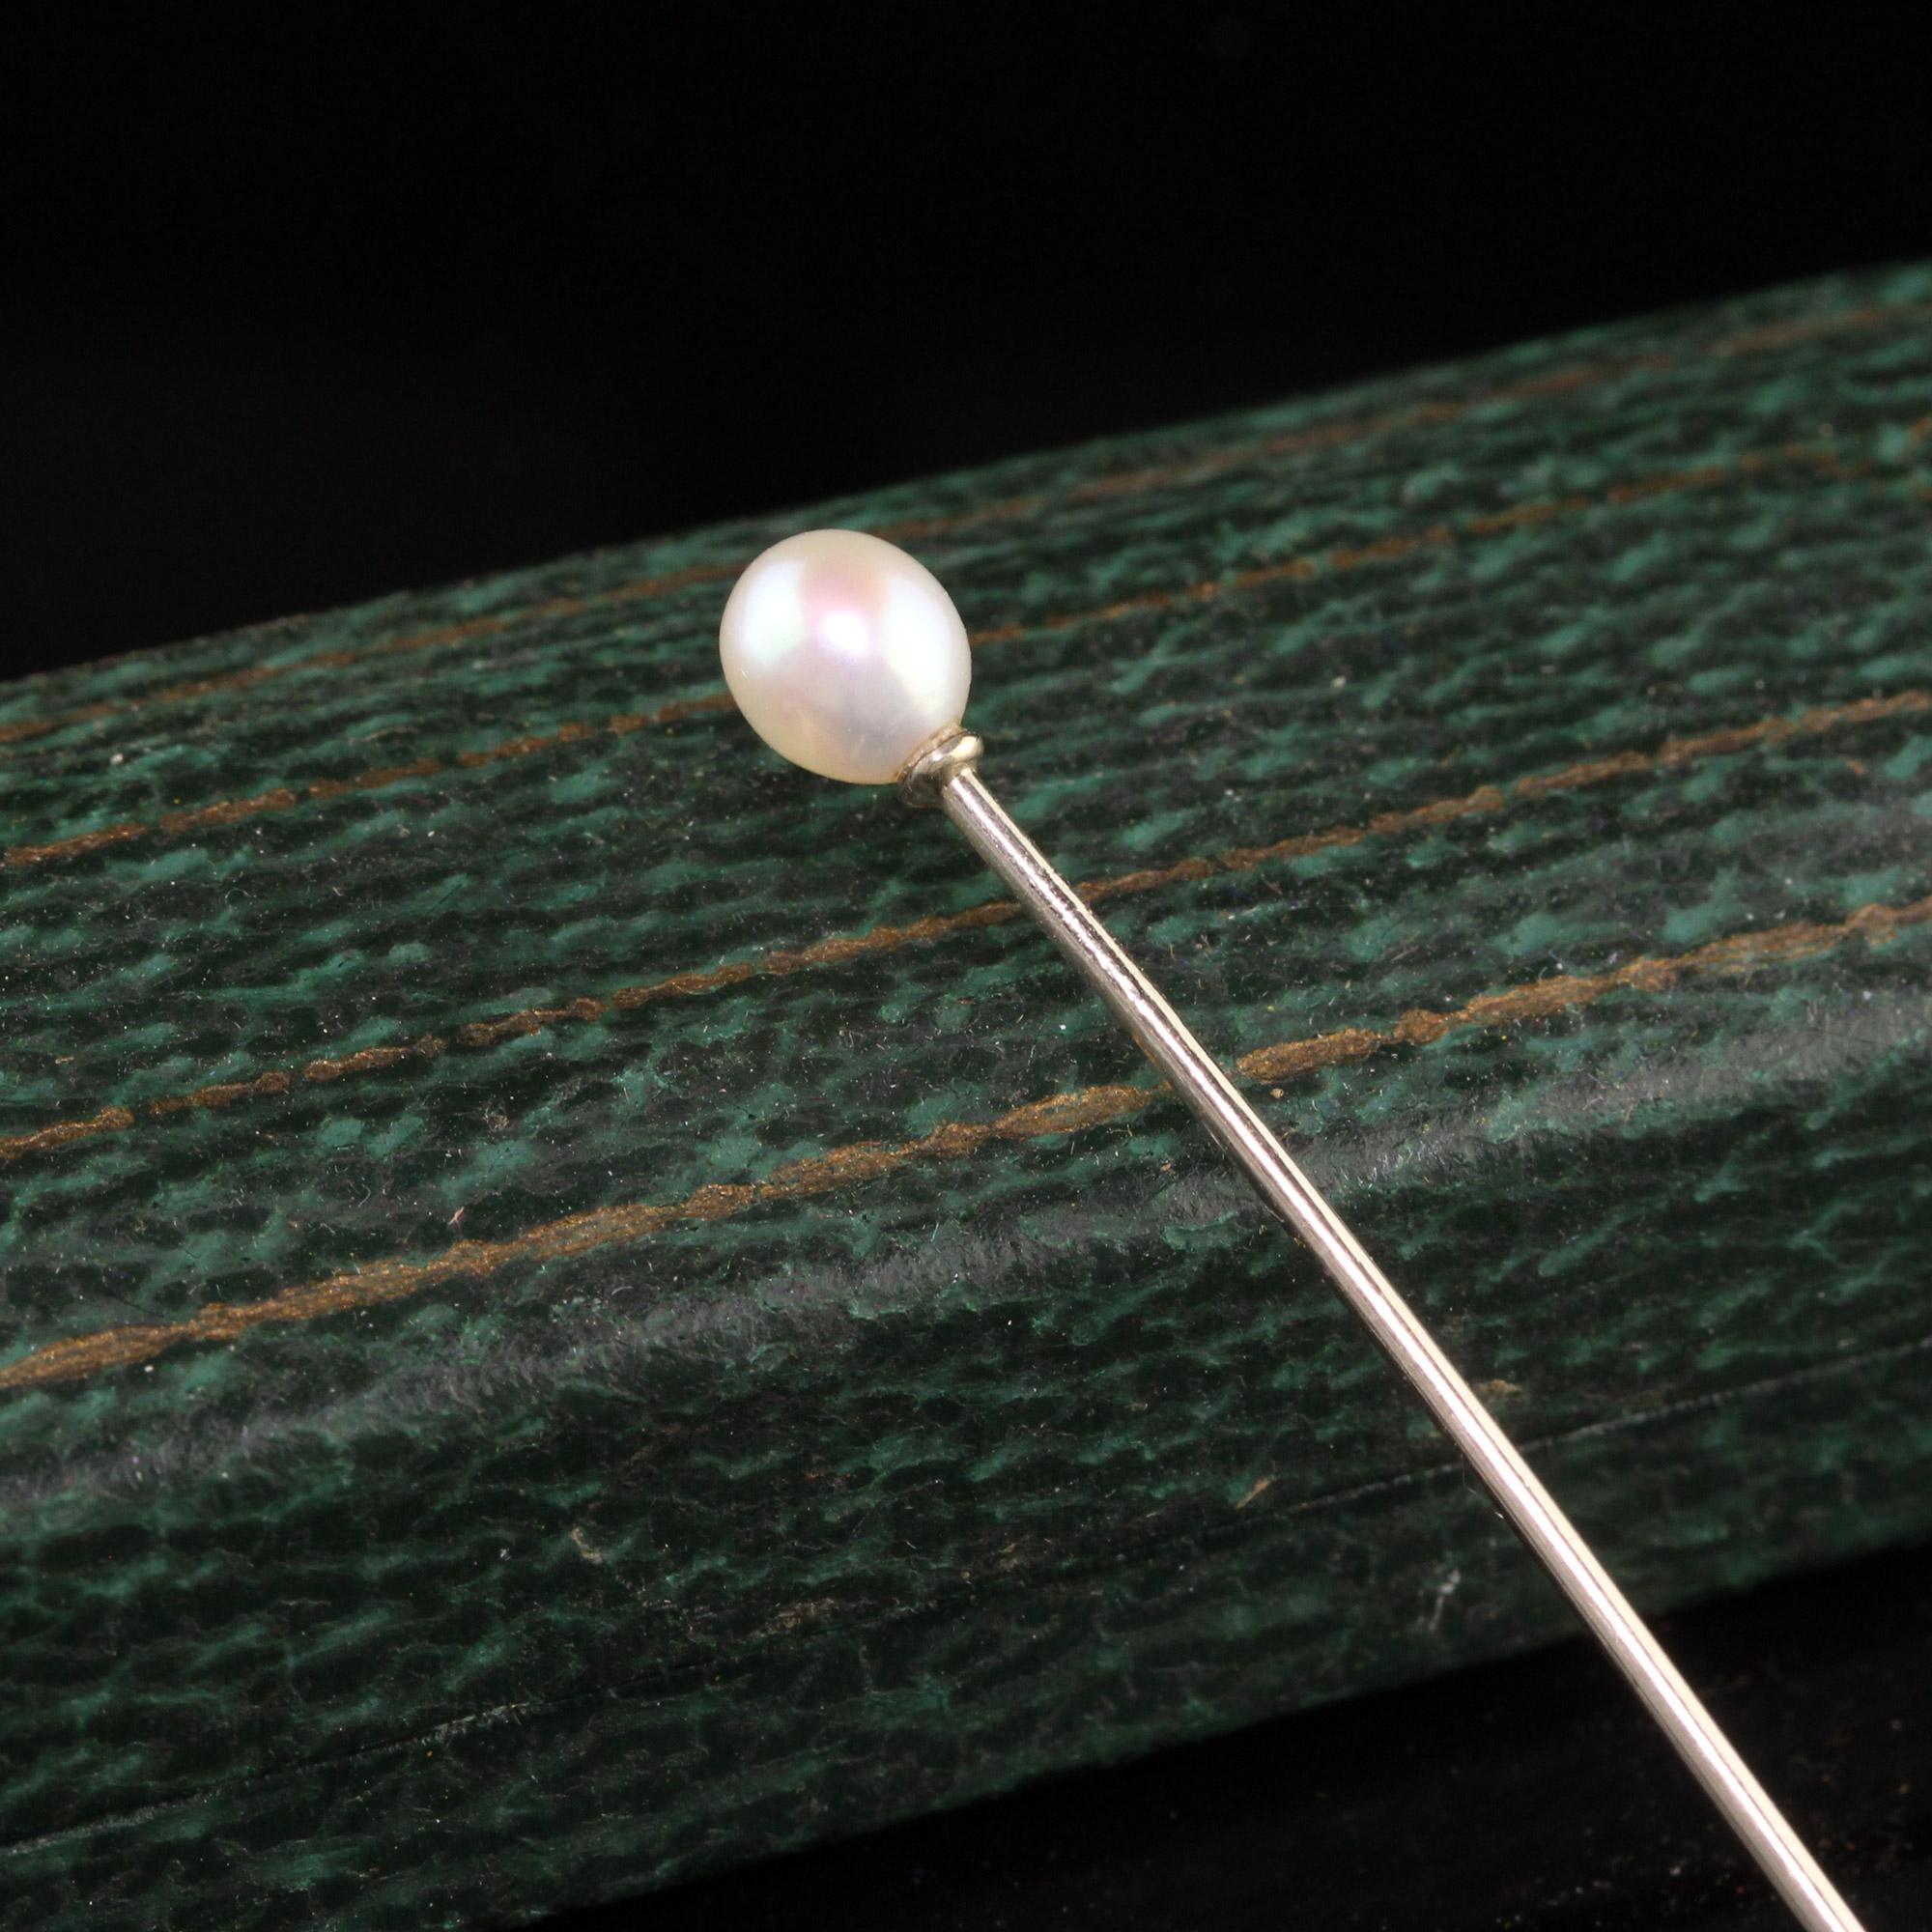 Beautiful Antique Art Deco 14K White Gold Natural Pearl Stick Pin. This classic stick pin is crafted in 14k white gold. The top has a natural pearl that gives it an undersated look and yet classic.

Item #P0143

Metal: 14K White Gold

Weight: 1